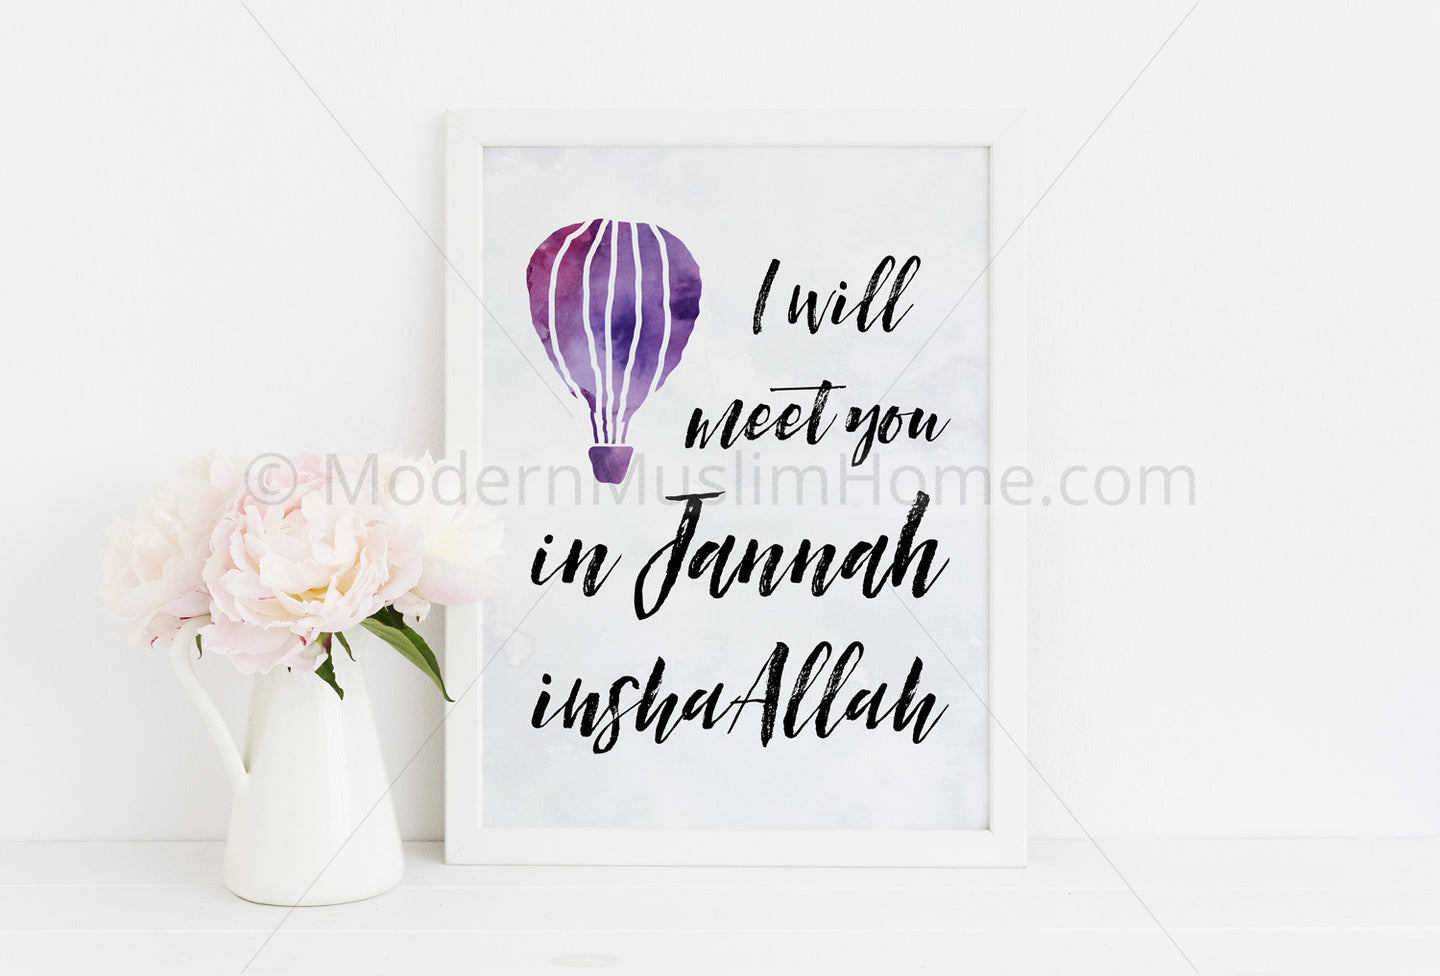 Meet You in Jannah [Instant Download]